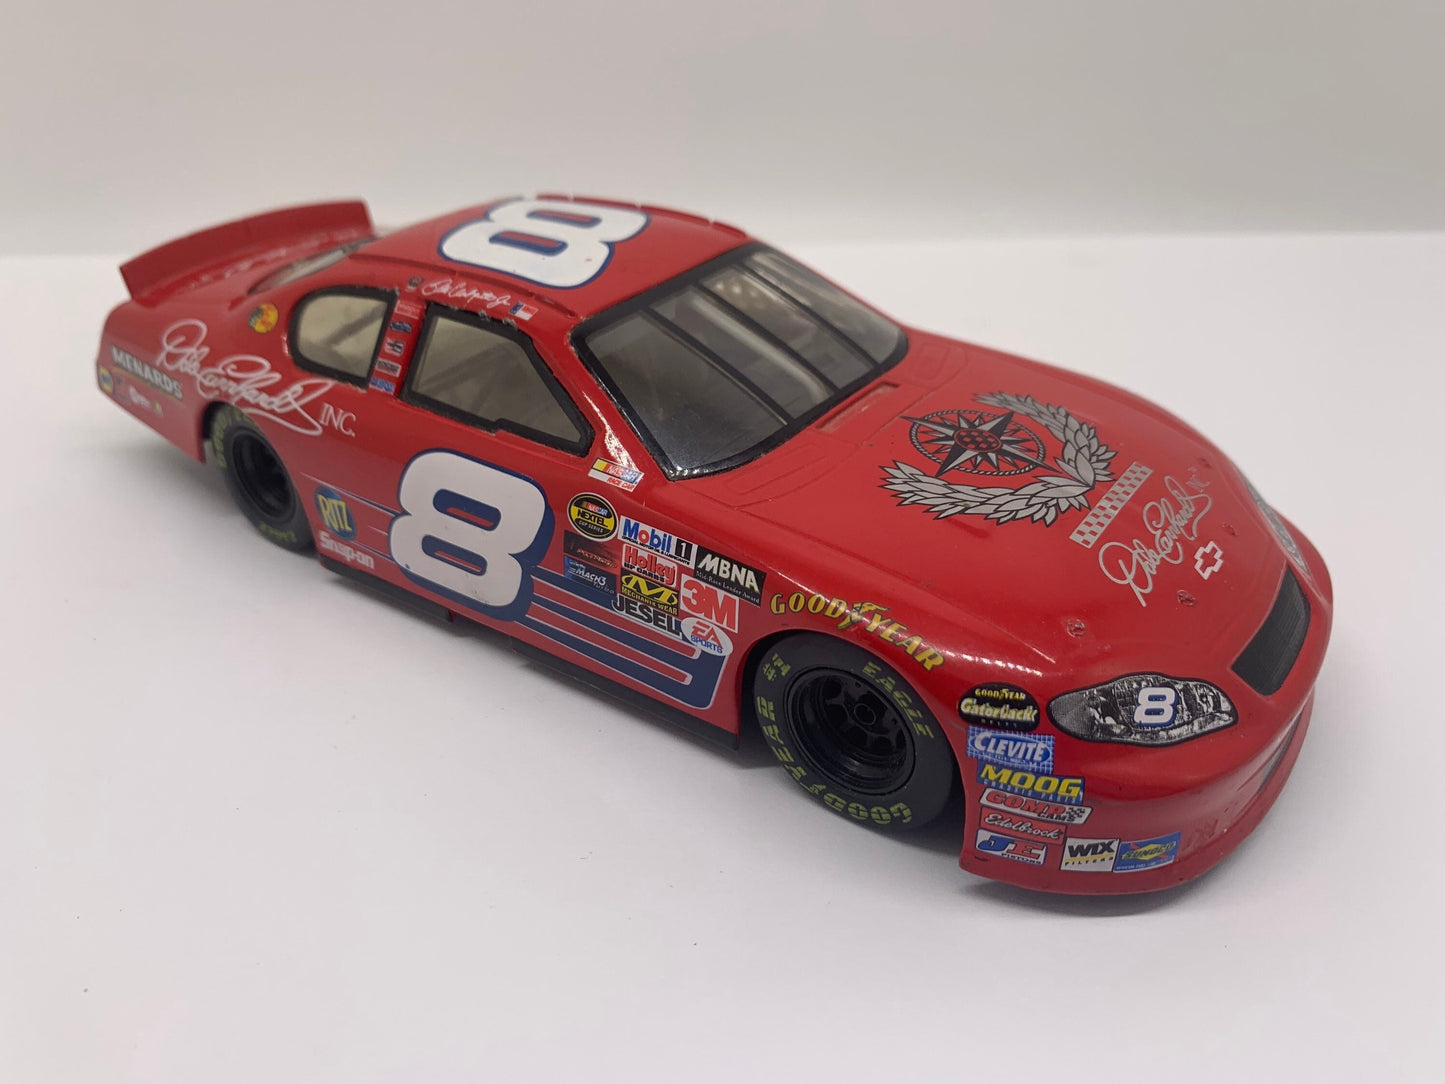 Action Dale Earnhardt Jr Chevy Monte Carlo Red Dale Earnhardt INC Perfect Birthday Gift Collectable 1:24 Scale Model Toy Car Nascar Replica